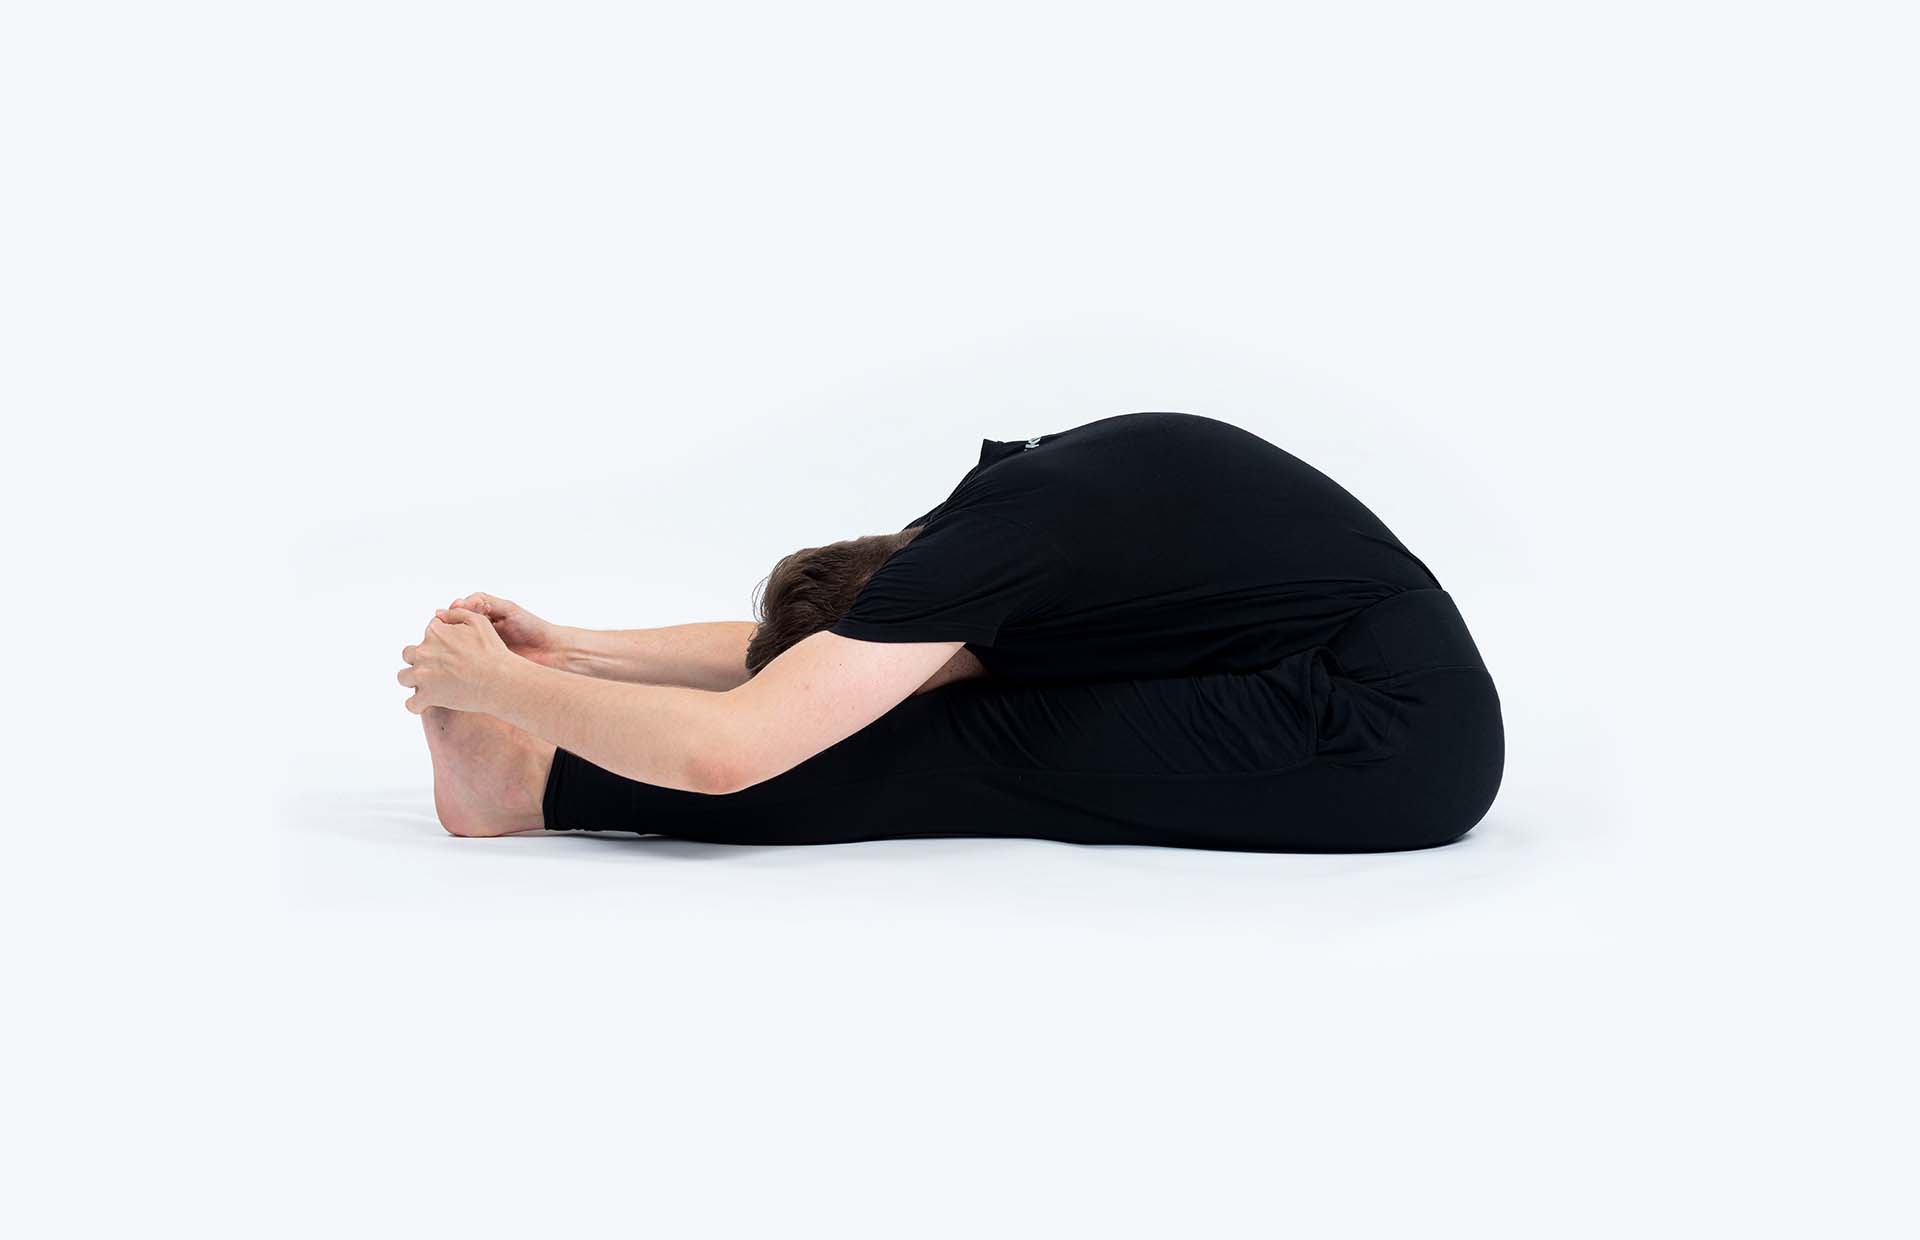 A person reaching into Paschimottanasana (Seated Forward Bend)